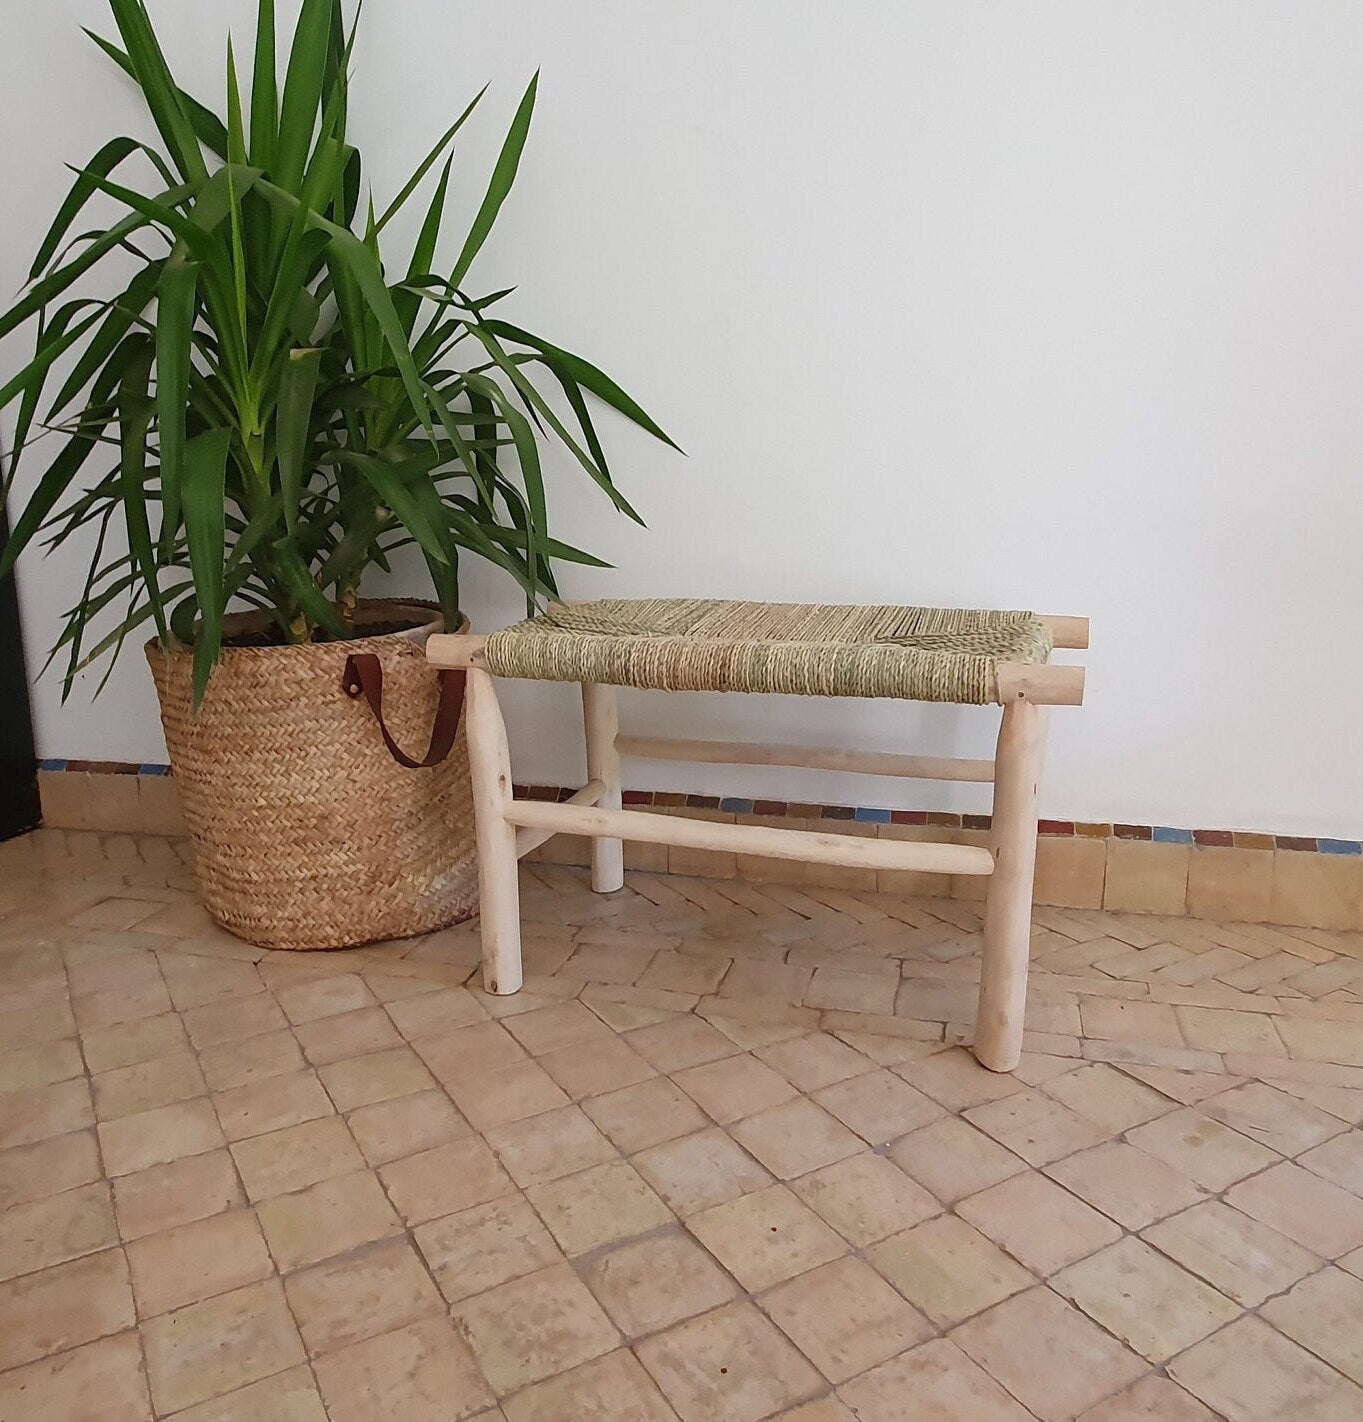 Image of a Moroccan bench crafted from woven solid wood